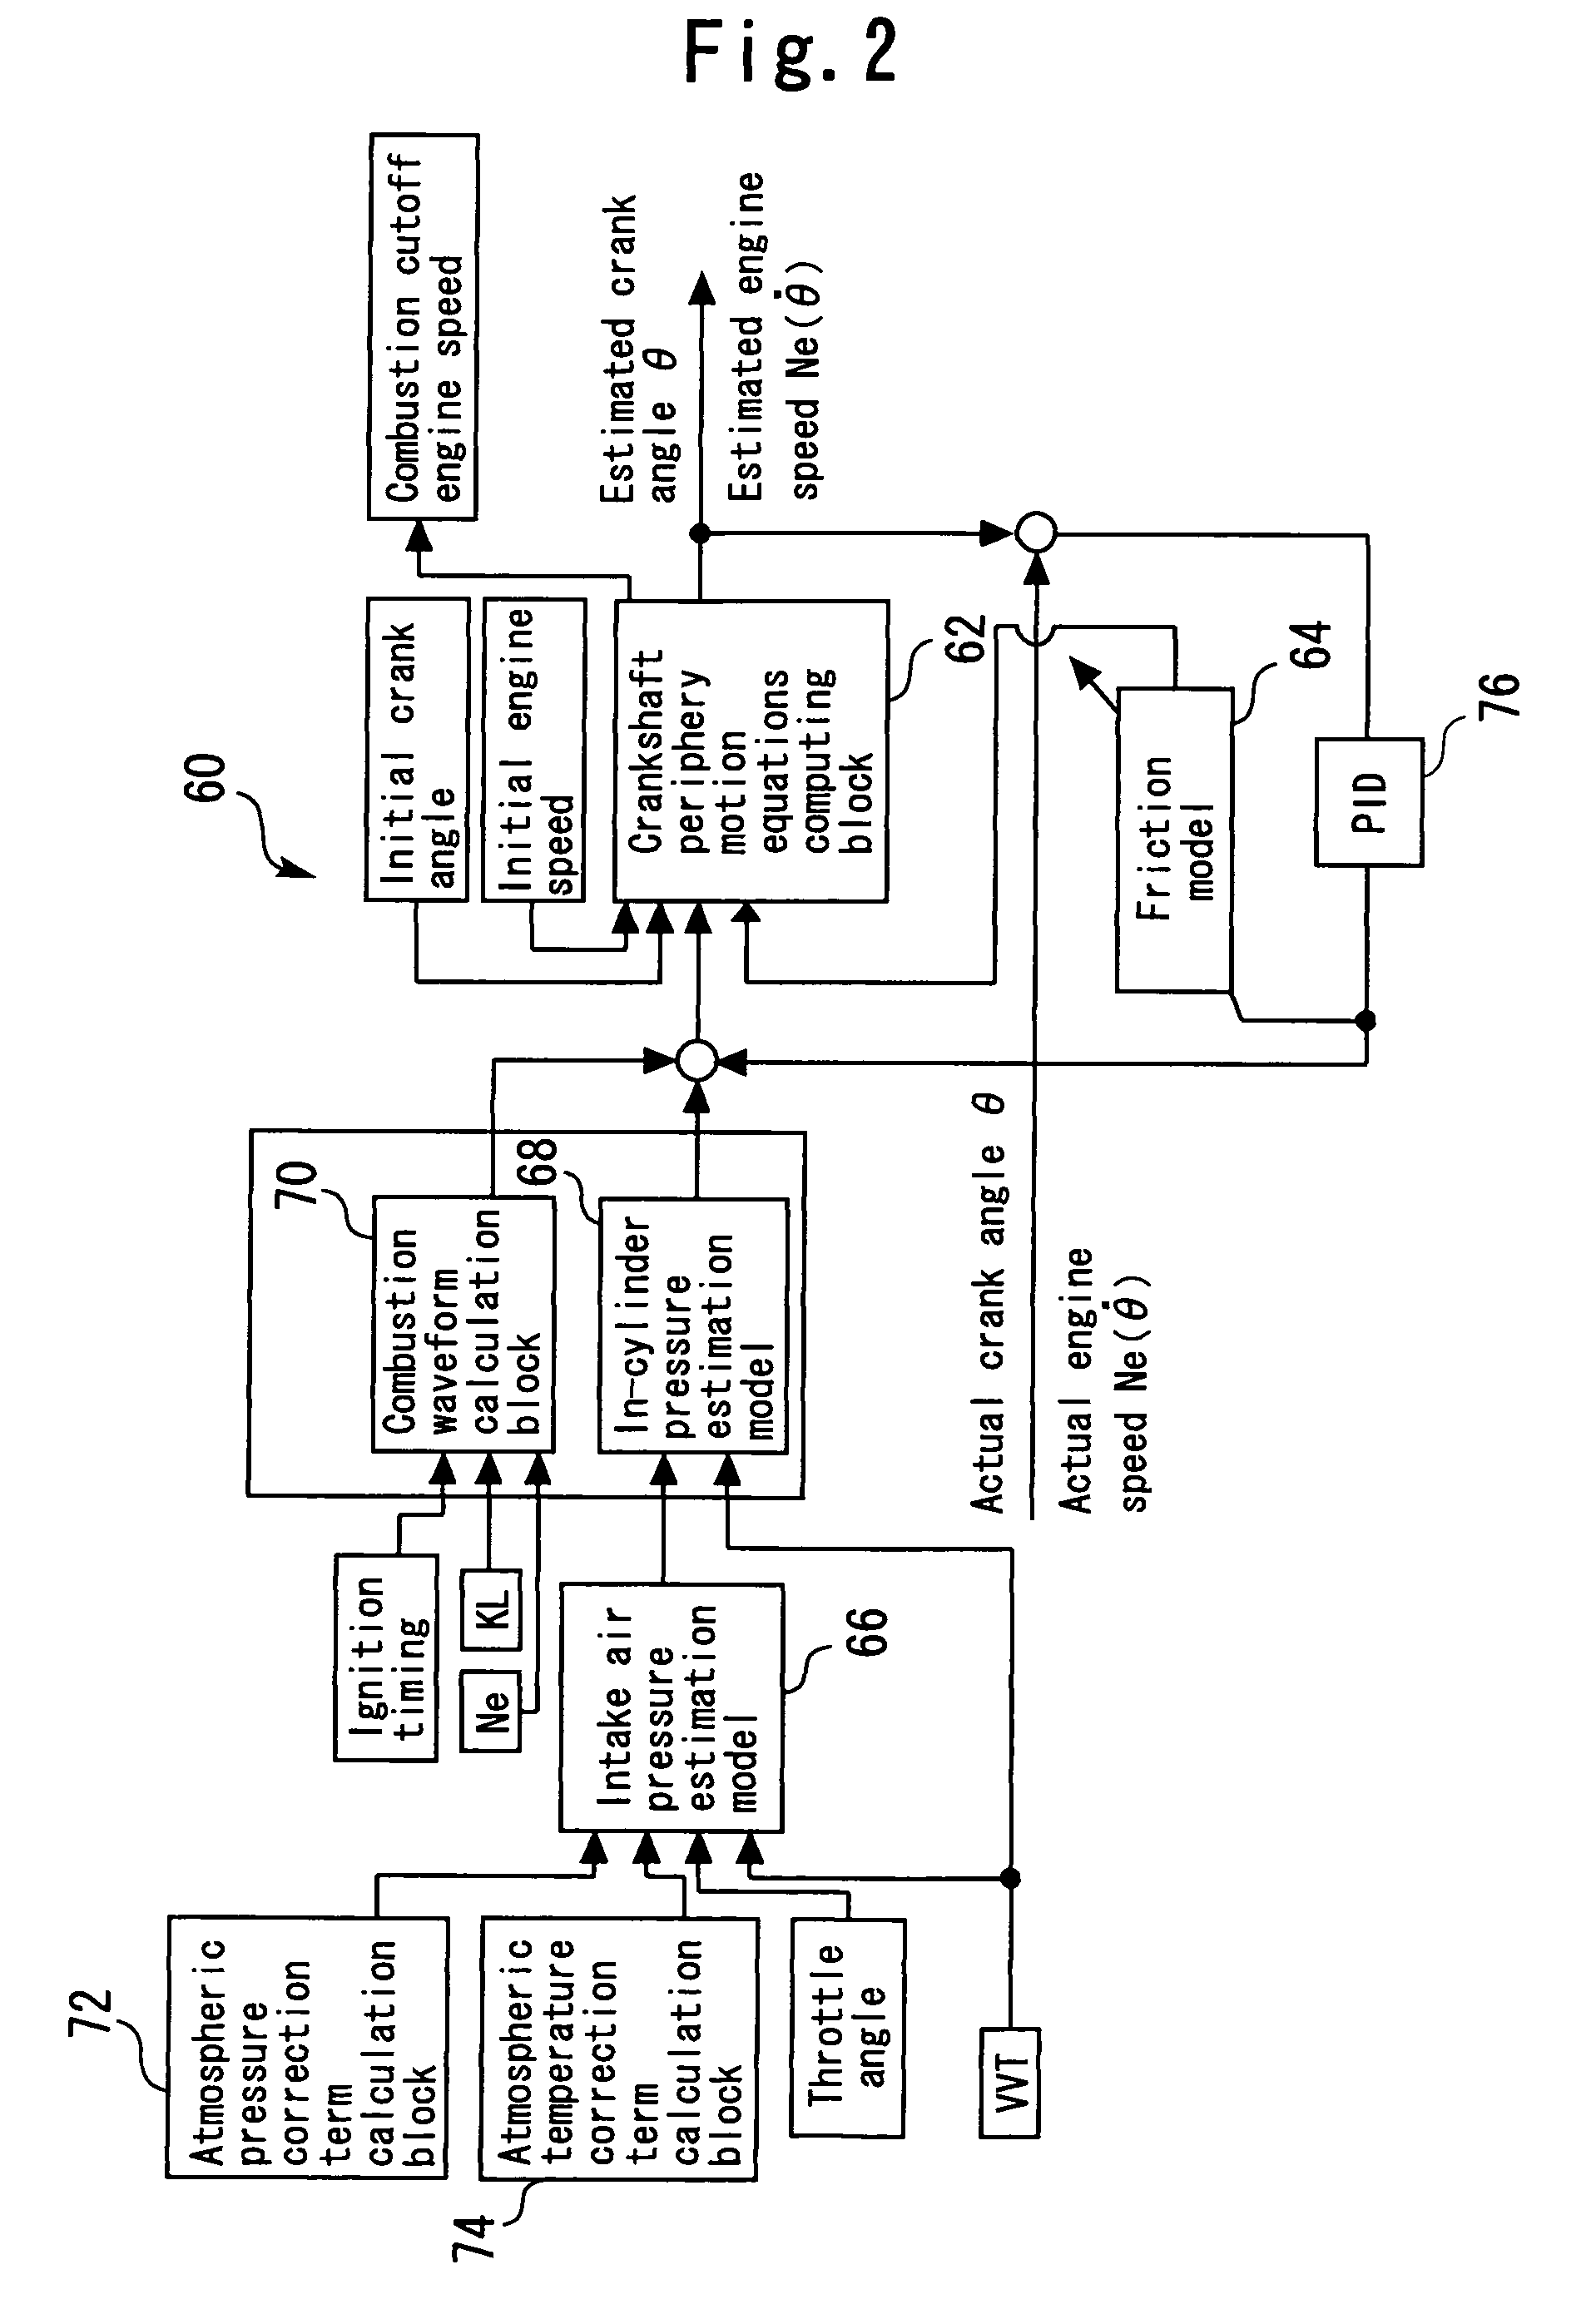 Stop position control apparatus for internal combustion engine